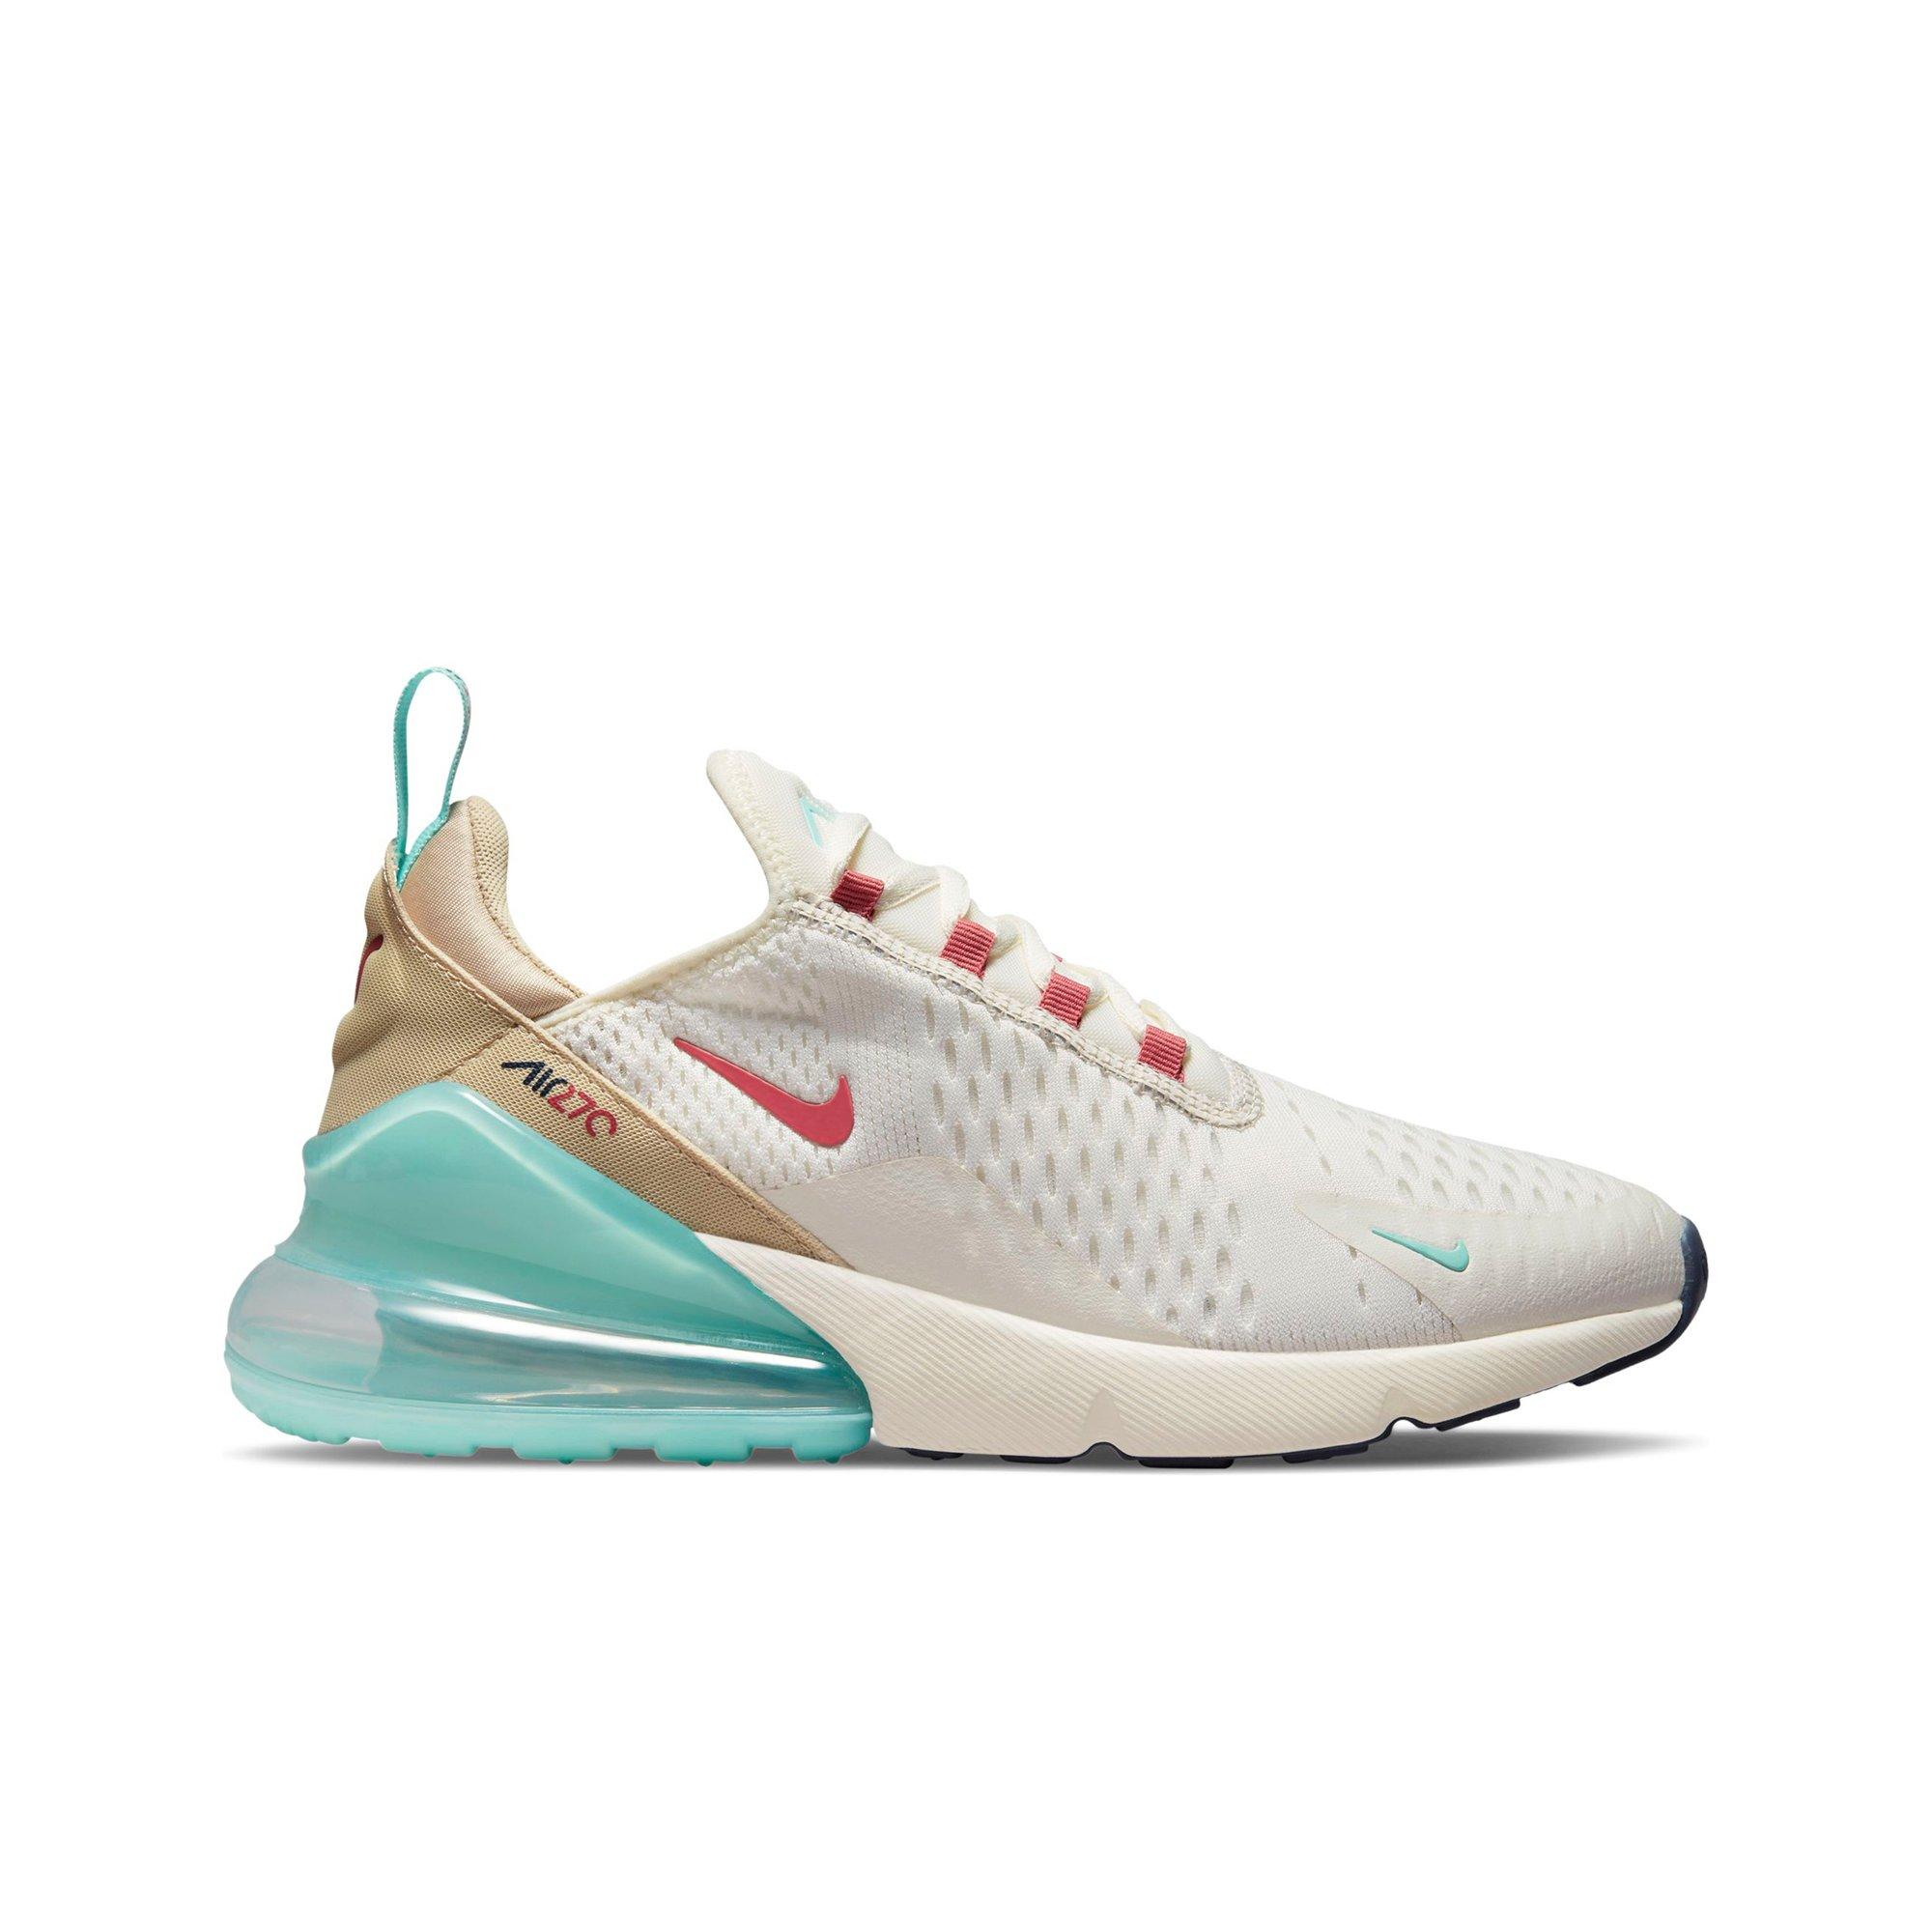 nike women's air max 270 shoes pink white blue